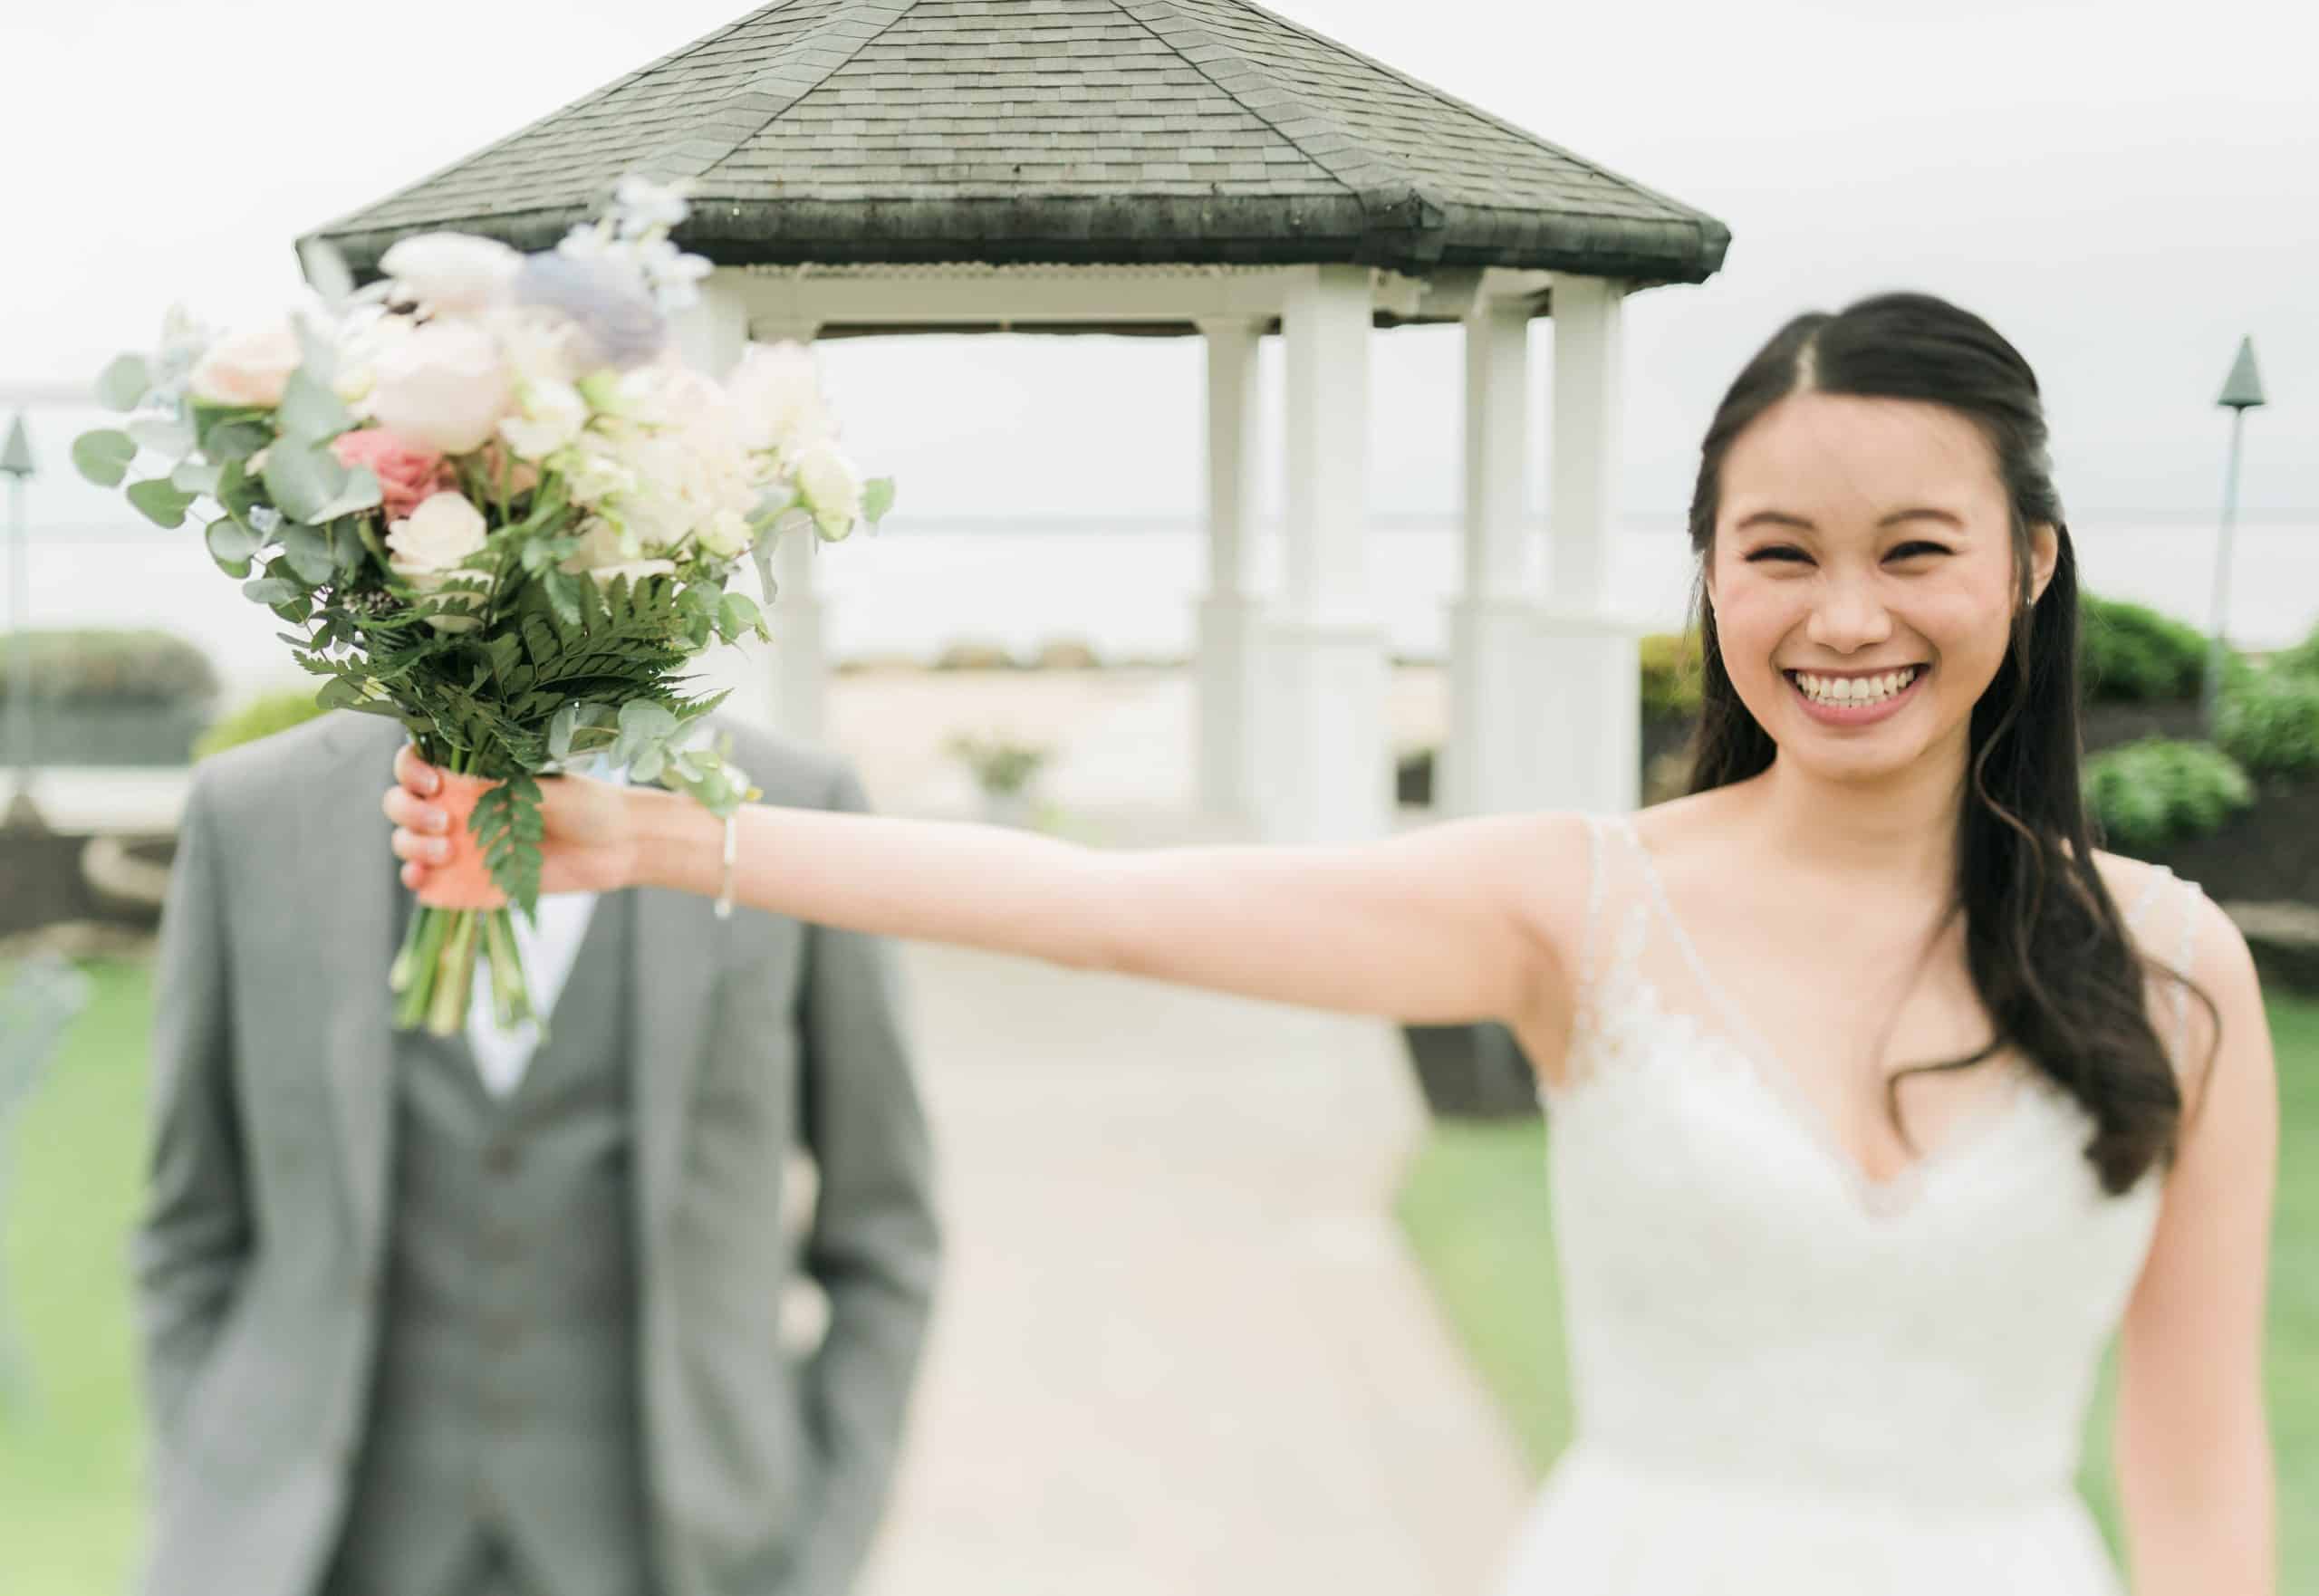 Lands End Catering in Sayville, NY - captured by Long Island wedding photographer Ben Lau.